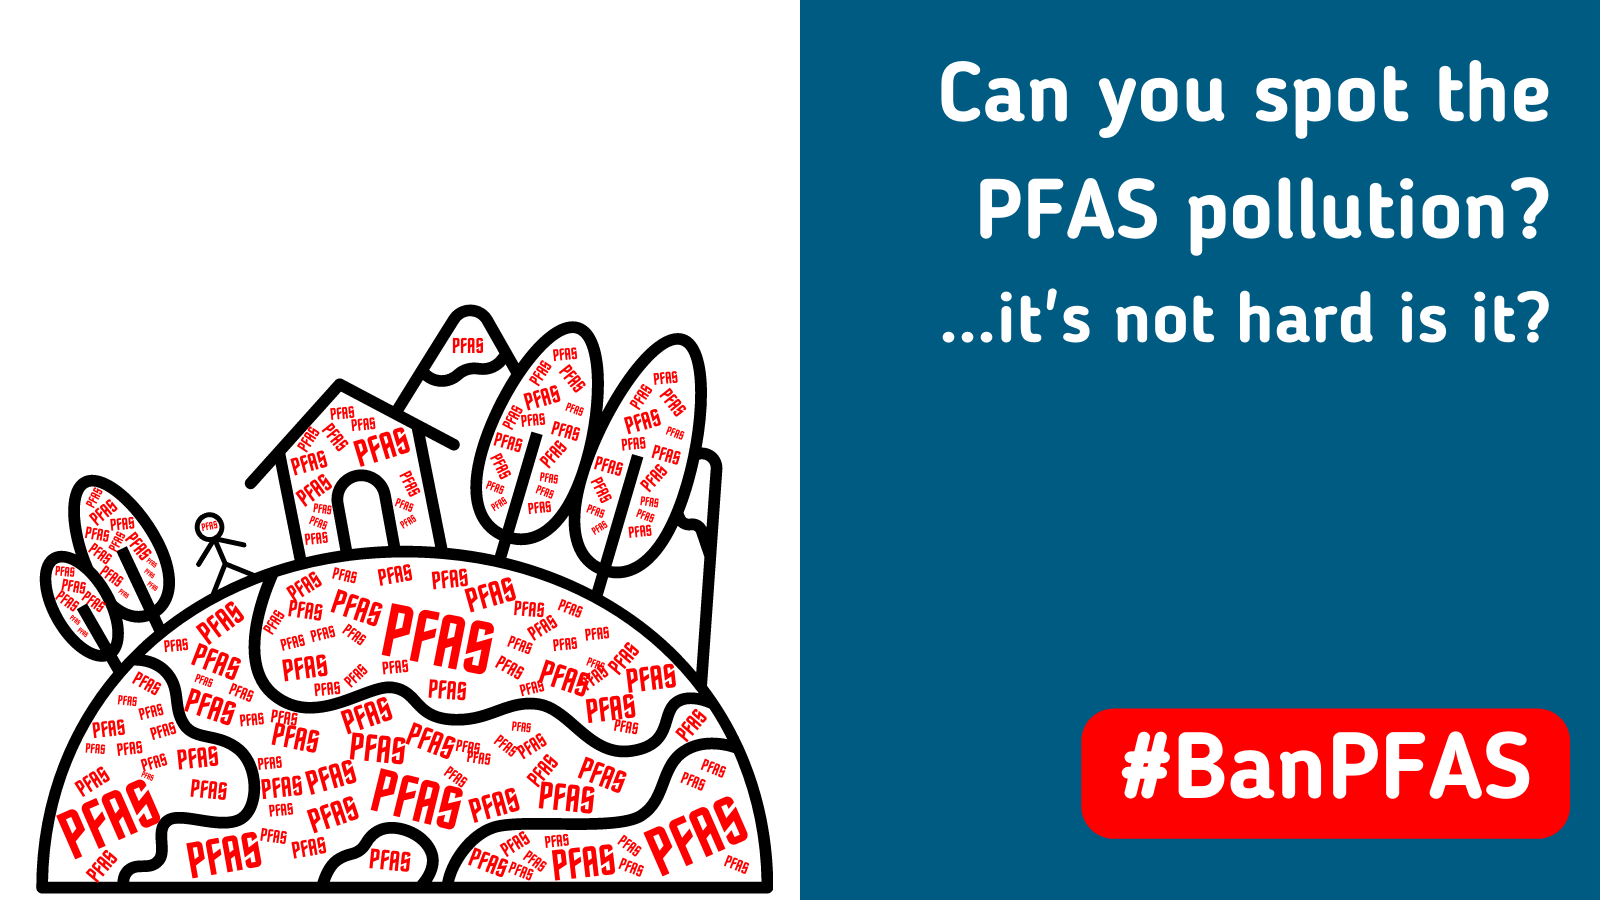 Over 100 organisations call on the European Commission to fully ban PFAS by 2030